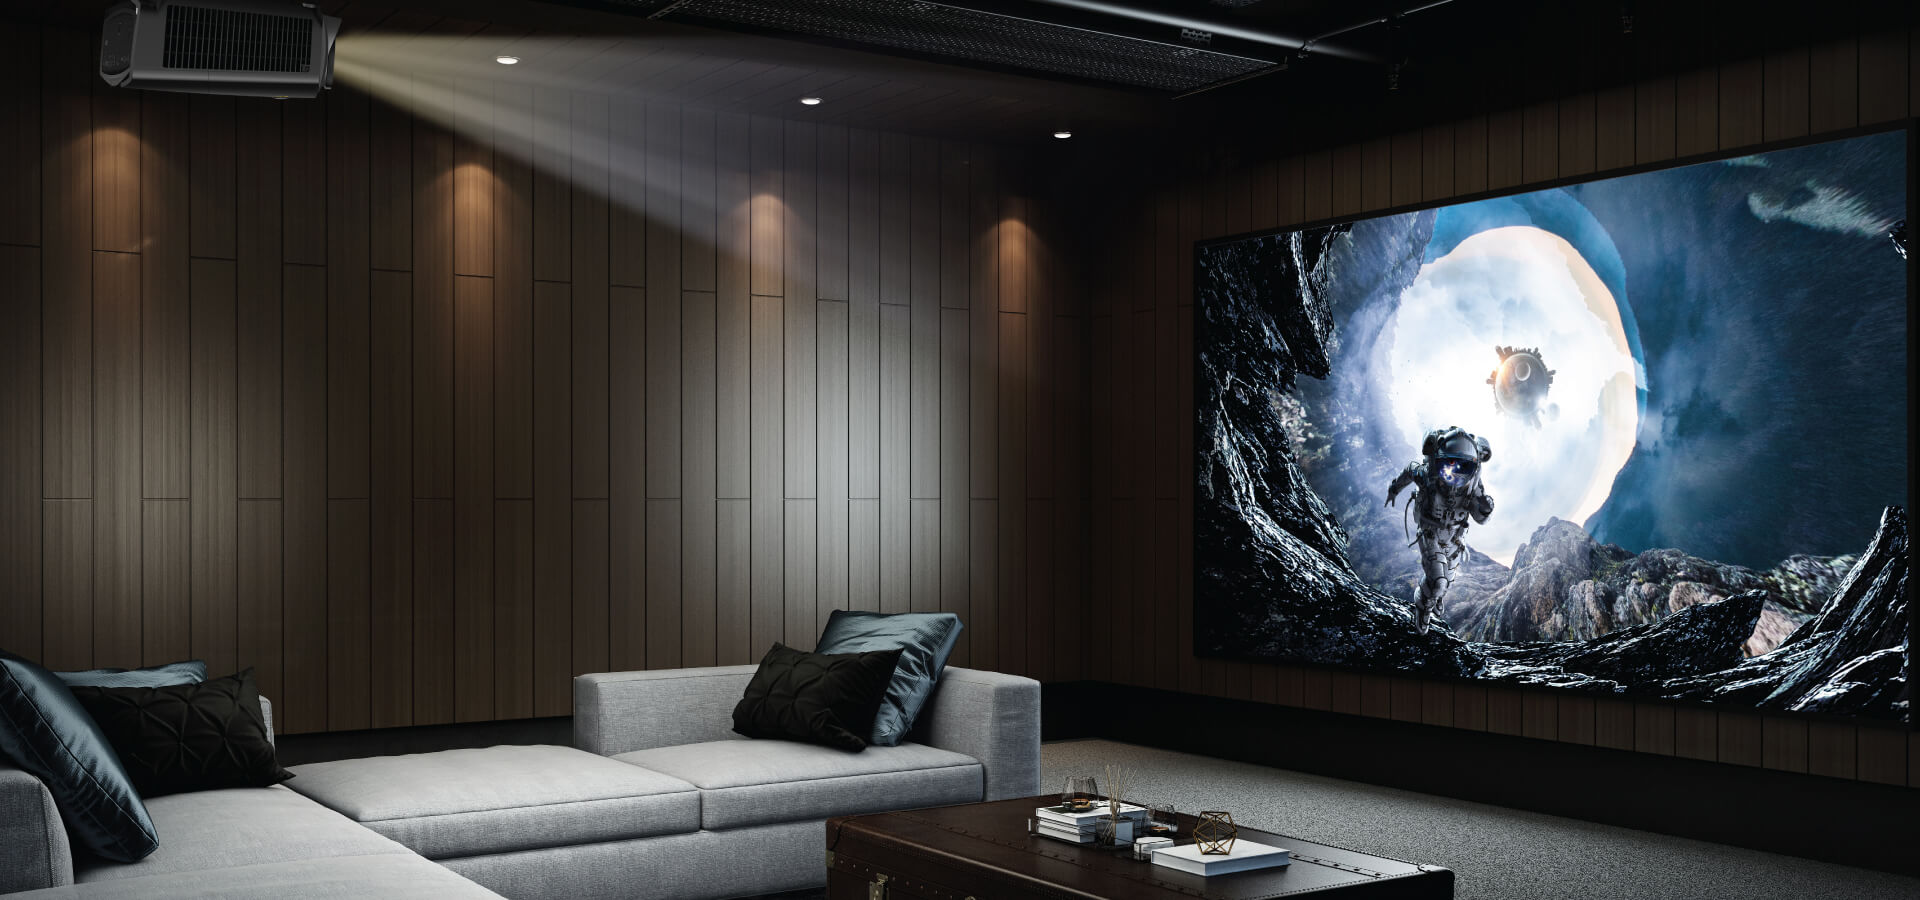 W2700 delivers the highest level of image accuracy to satisfy cinema fanatics’ taste